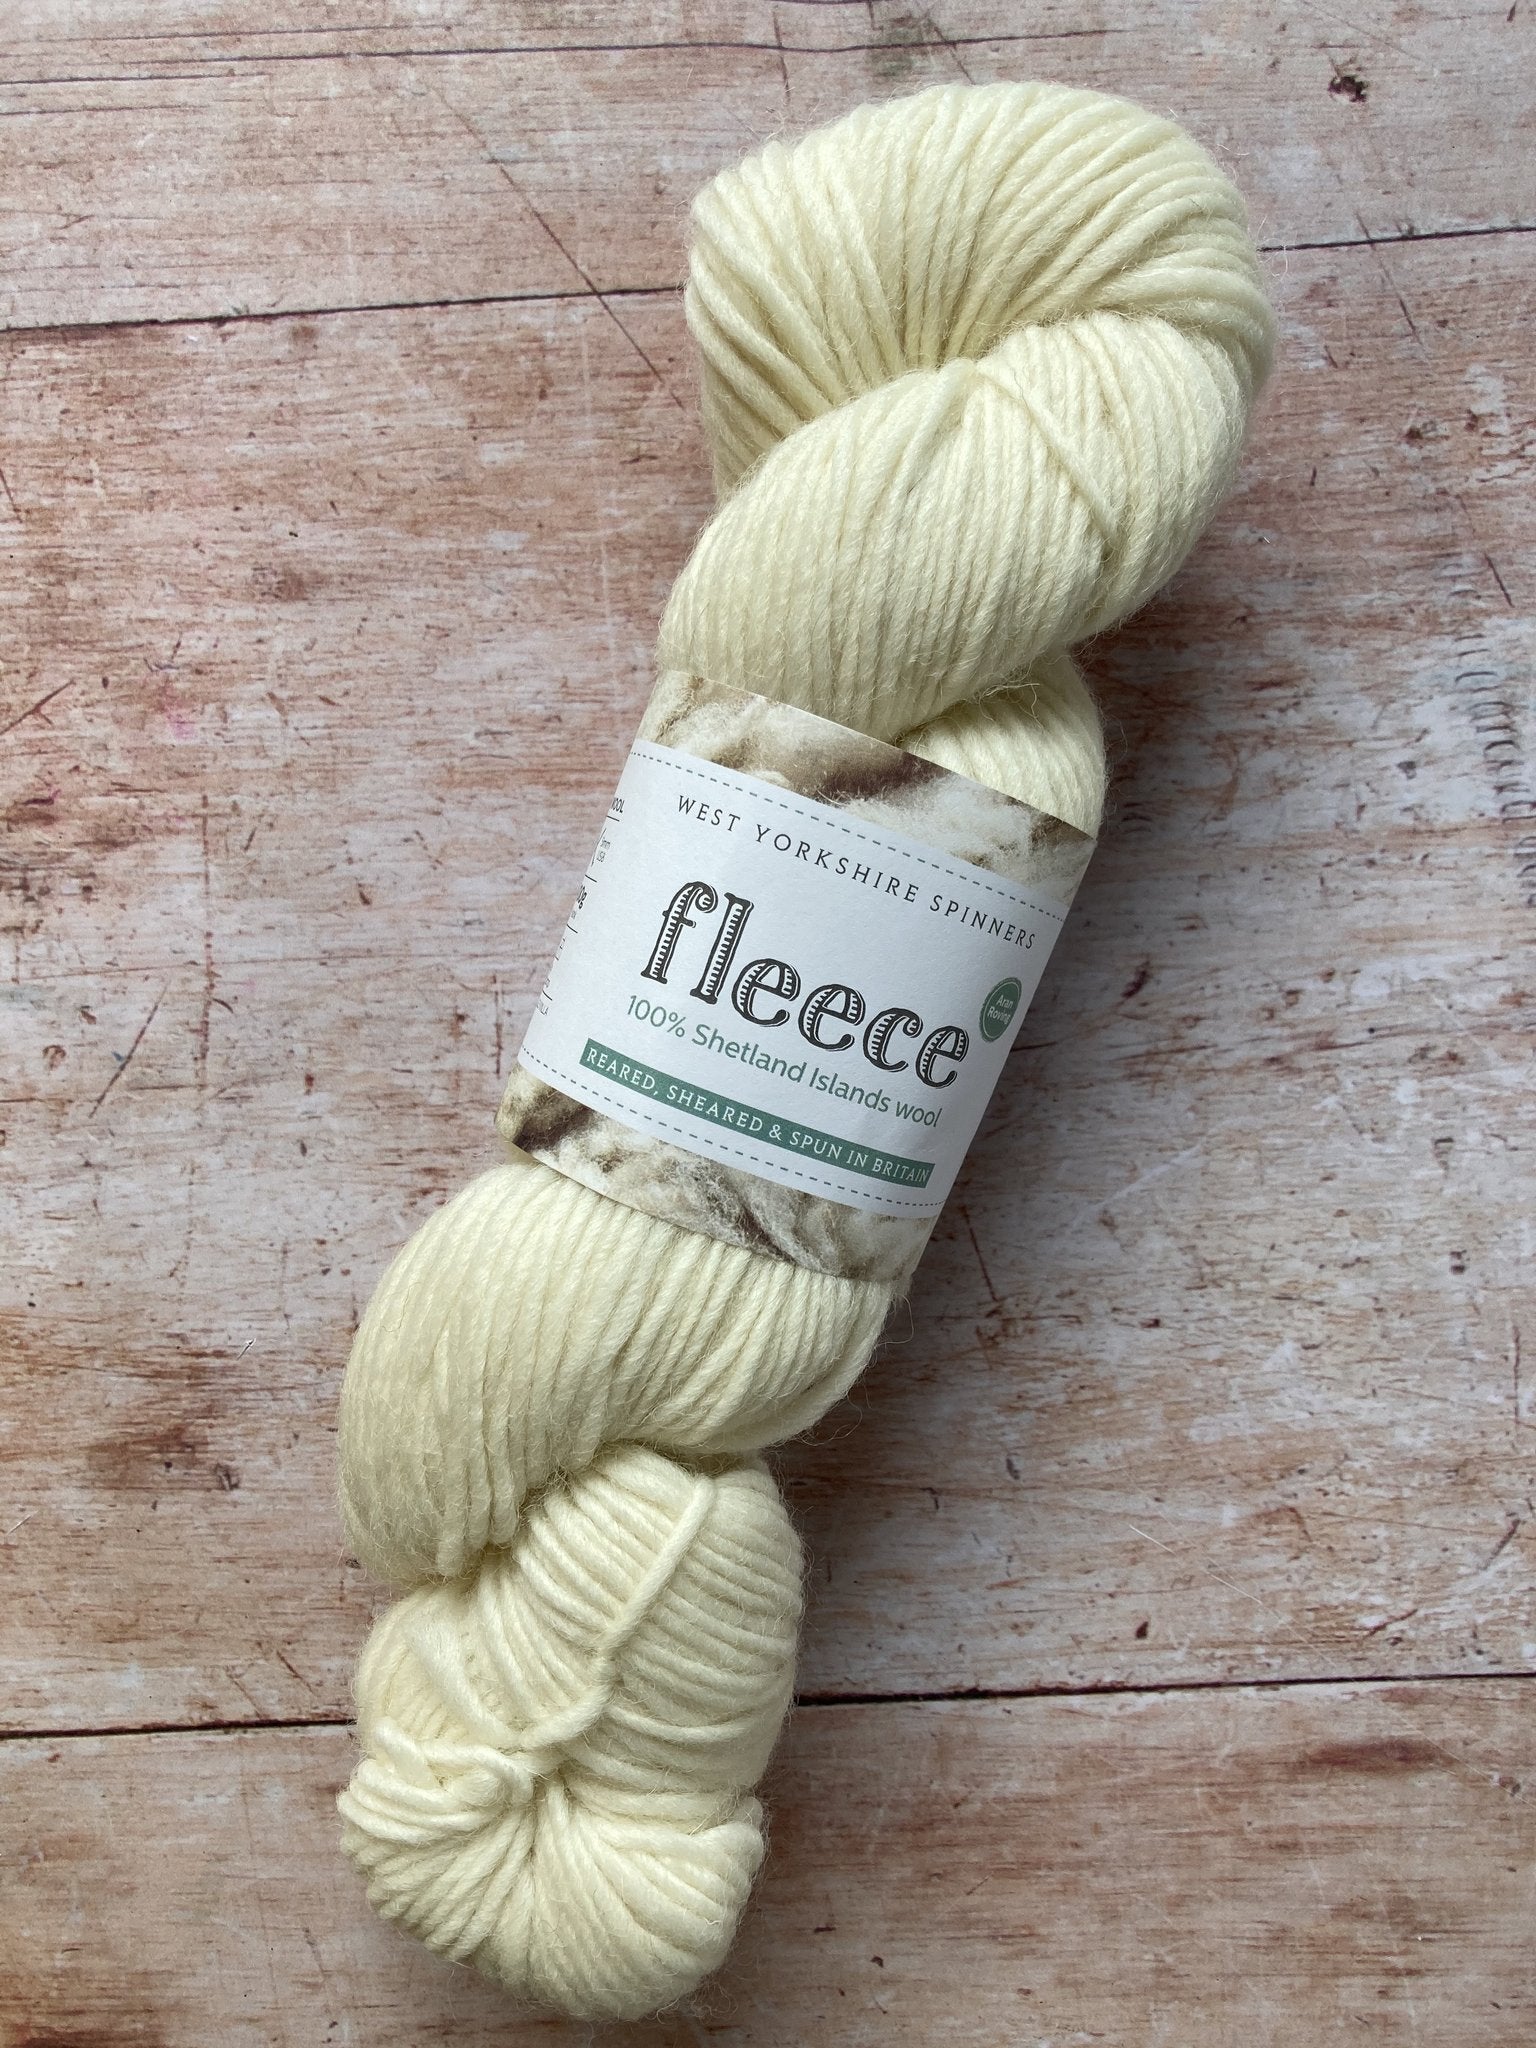 West Yorkshire Spinners Fleece Bluefaced Leicester Dk 002 Light Brown